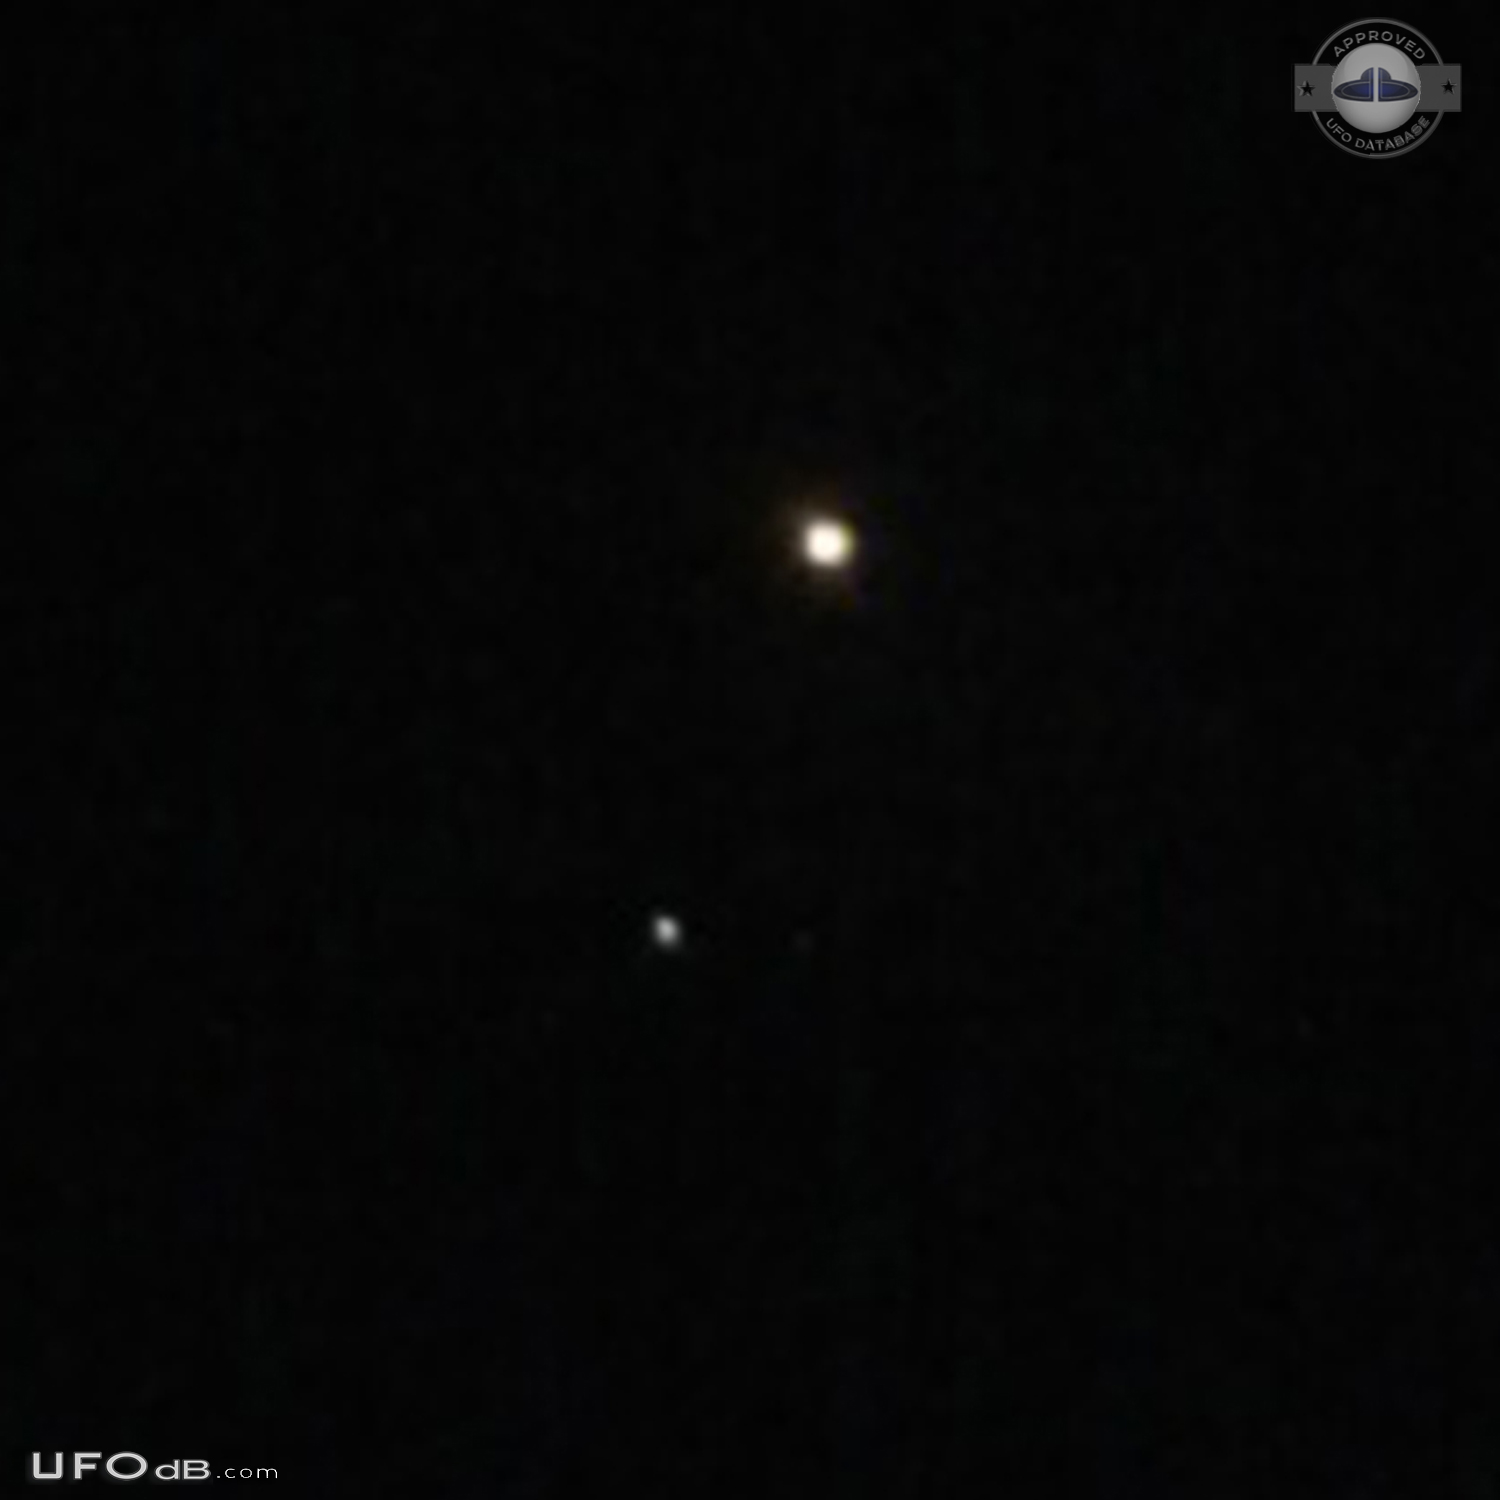 Multi colored triangle with 3 smaller orbs UFOS - Florida USA 2015 UFO Picture #679-2